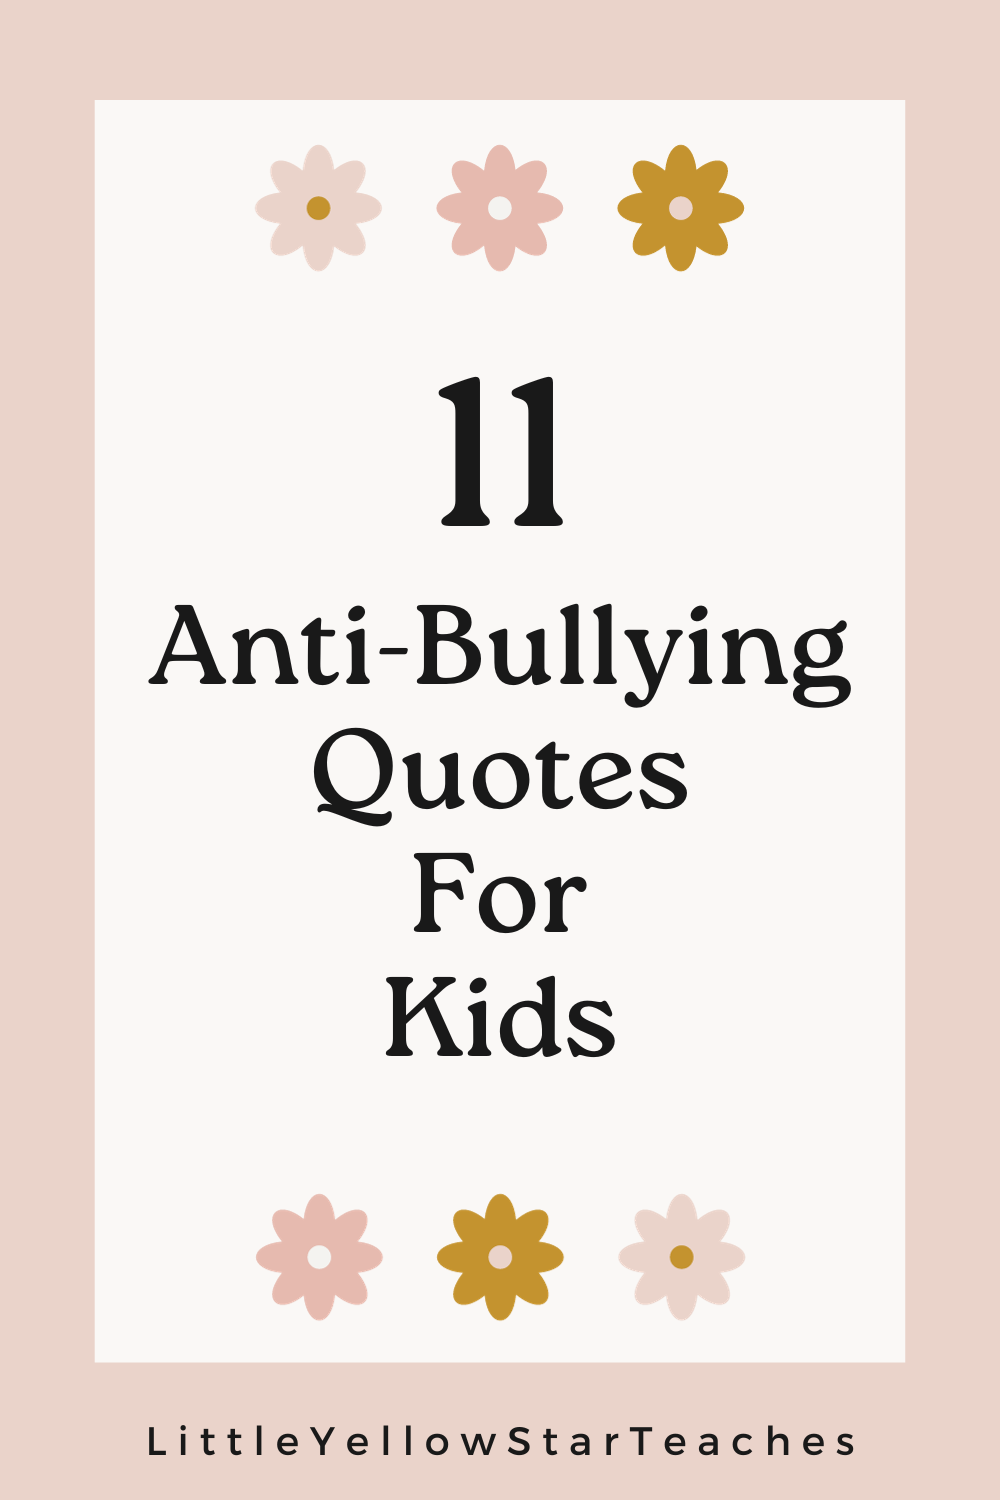 Anti-Bullying Quotes For Kids